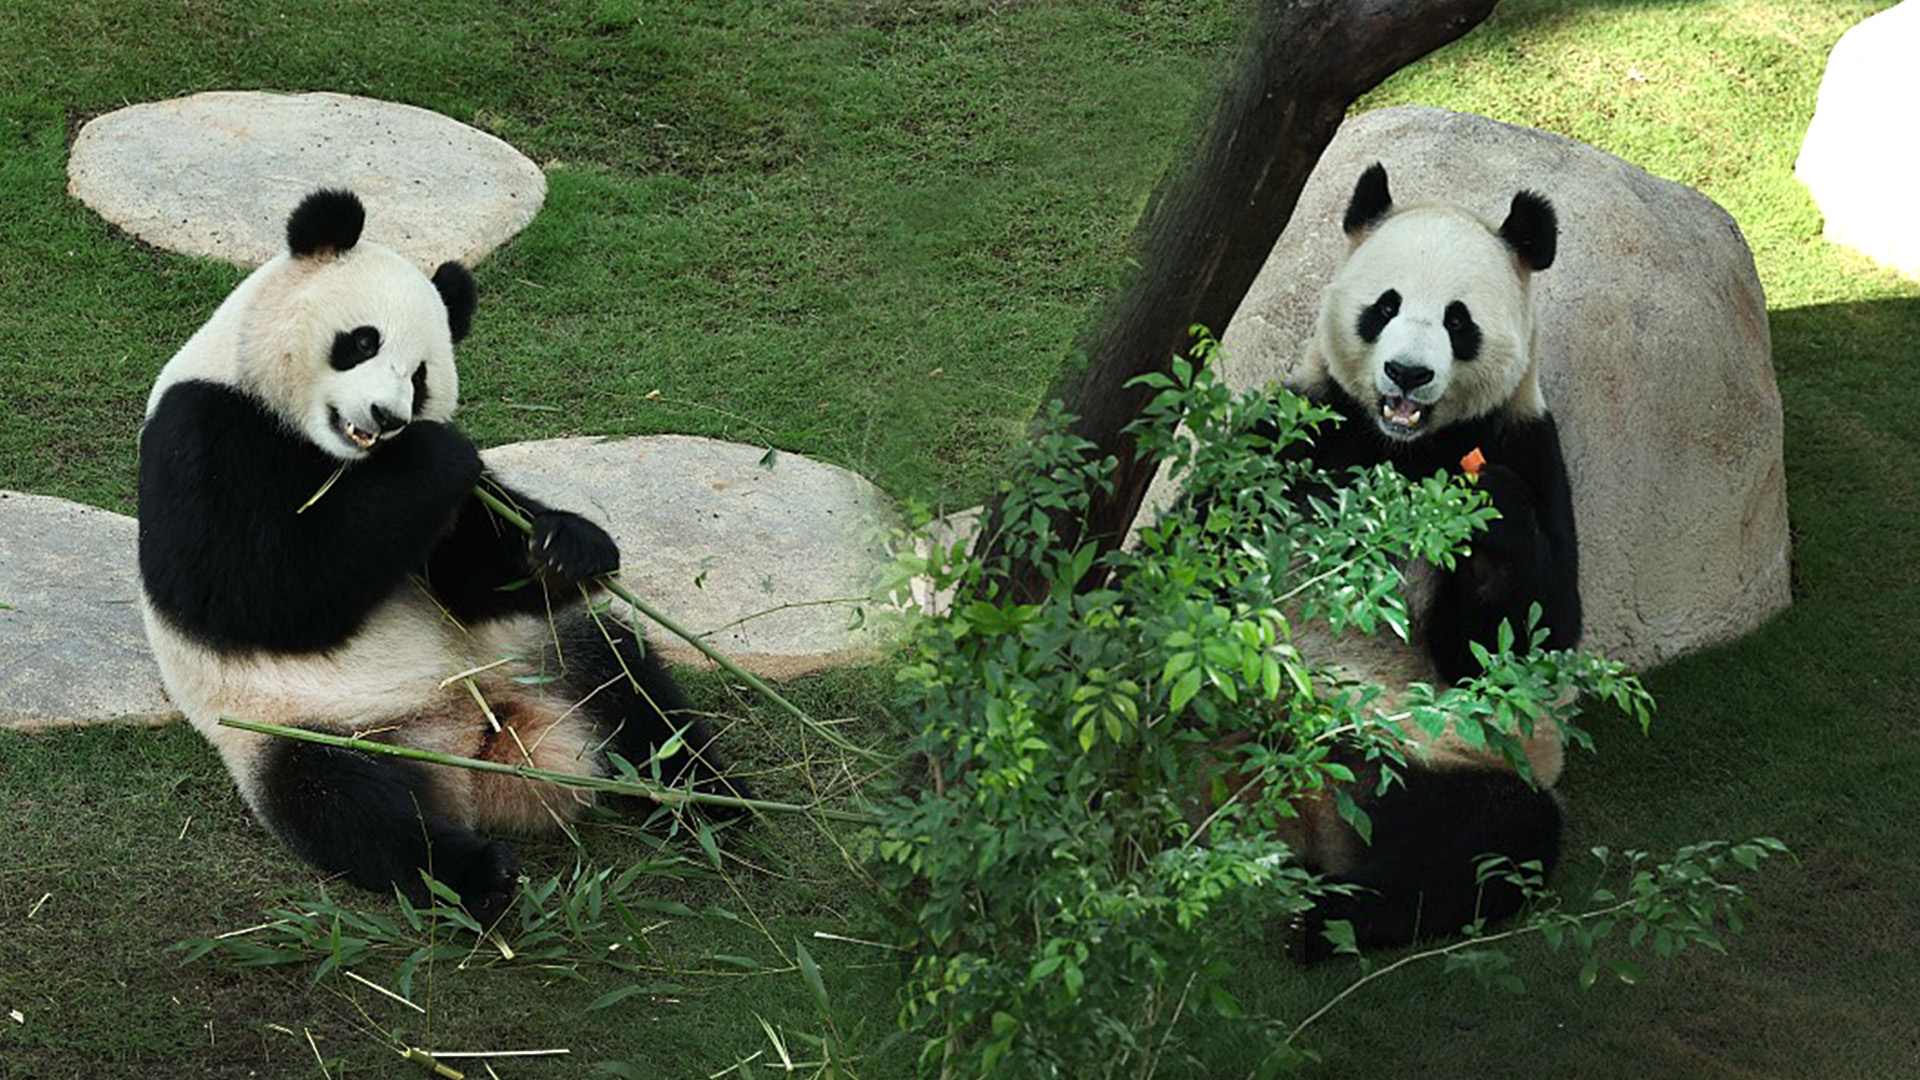 Live: Panda House is a key attraction at Qatar World Cup